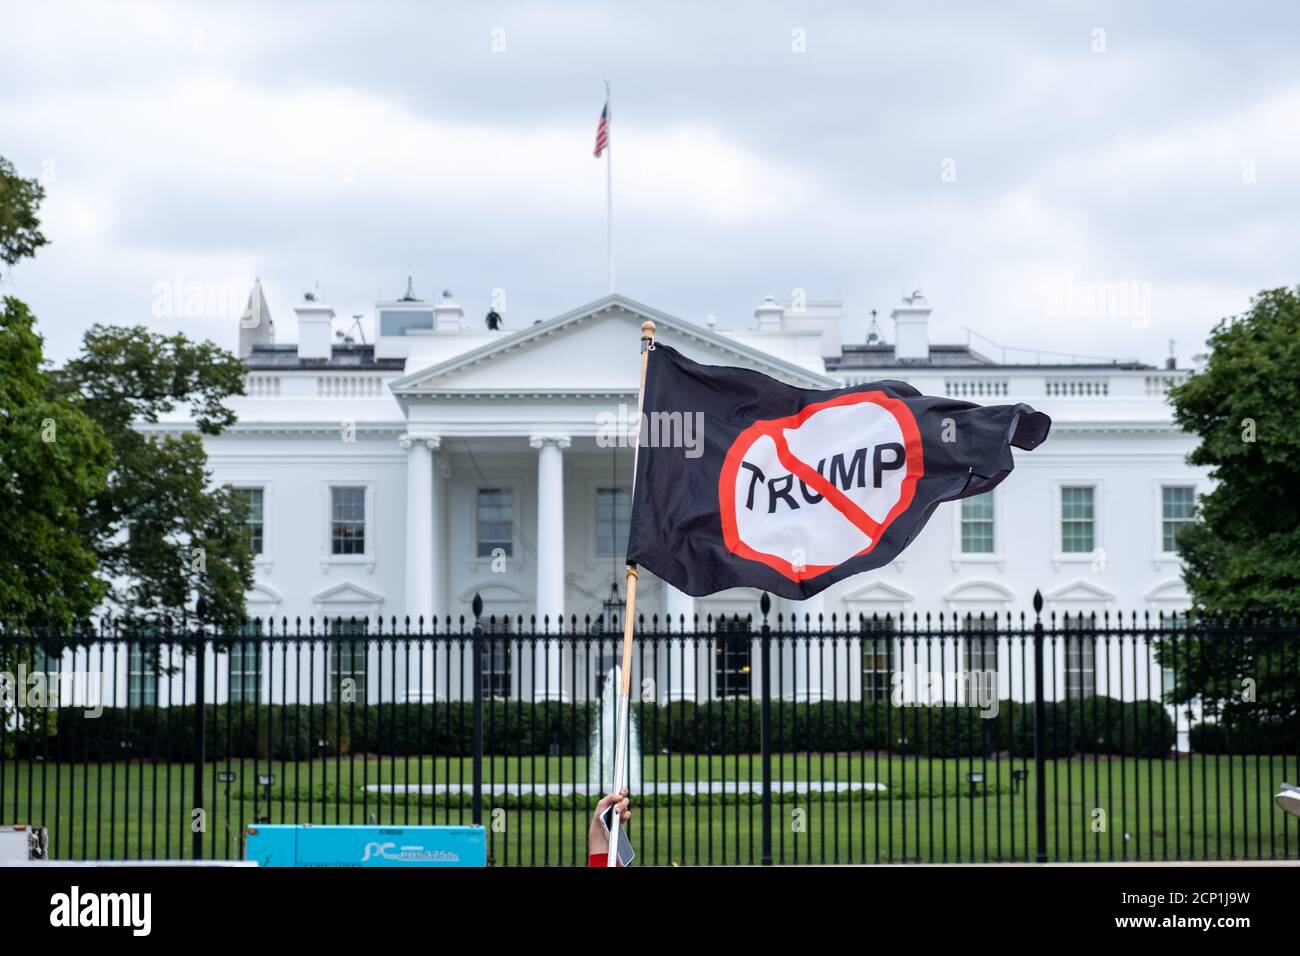 A man waves an anti-Trump flag in front of the White House on the day that the White House Siege was supposed to happen but was cancelled. Stock Photo